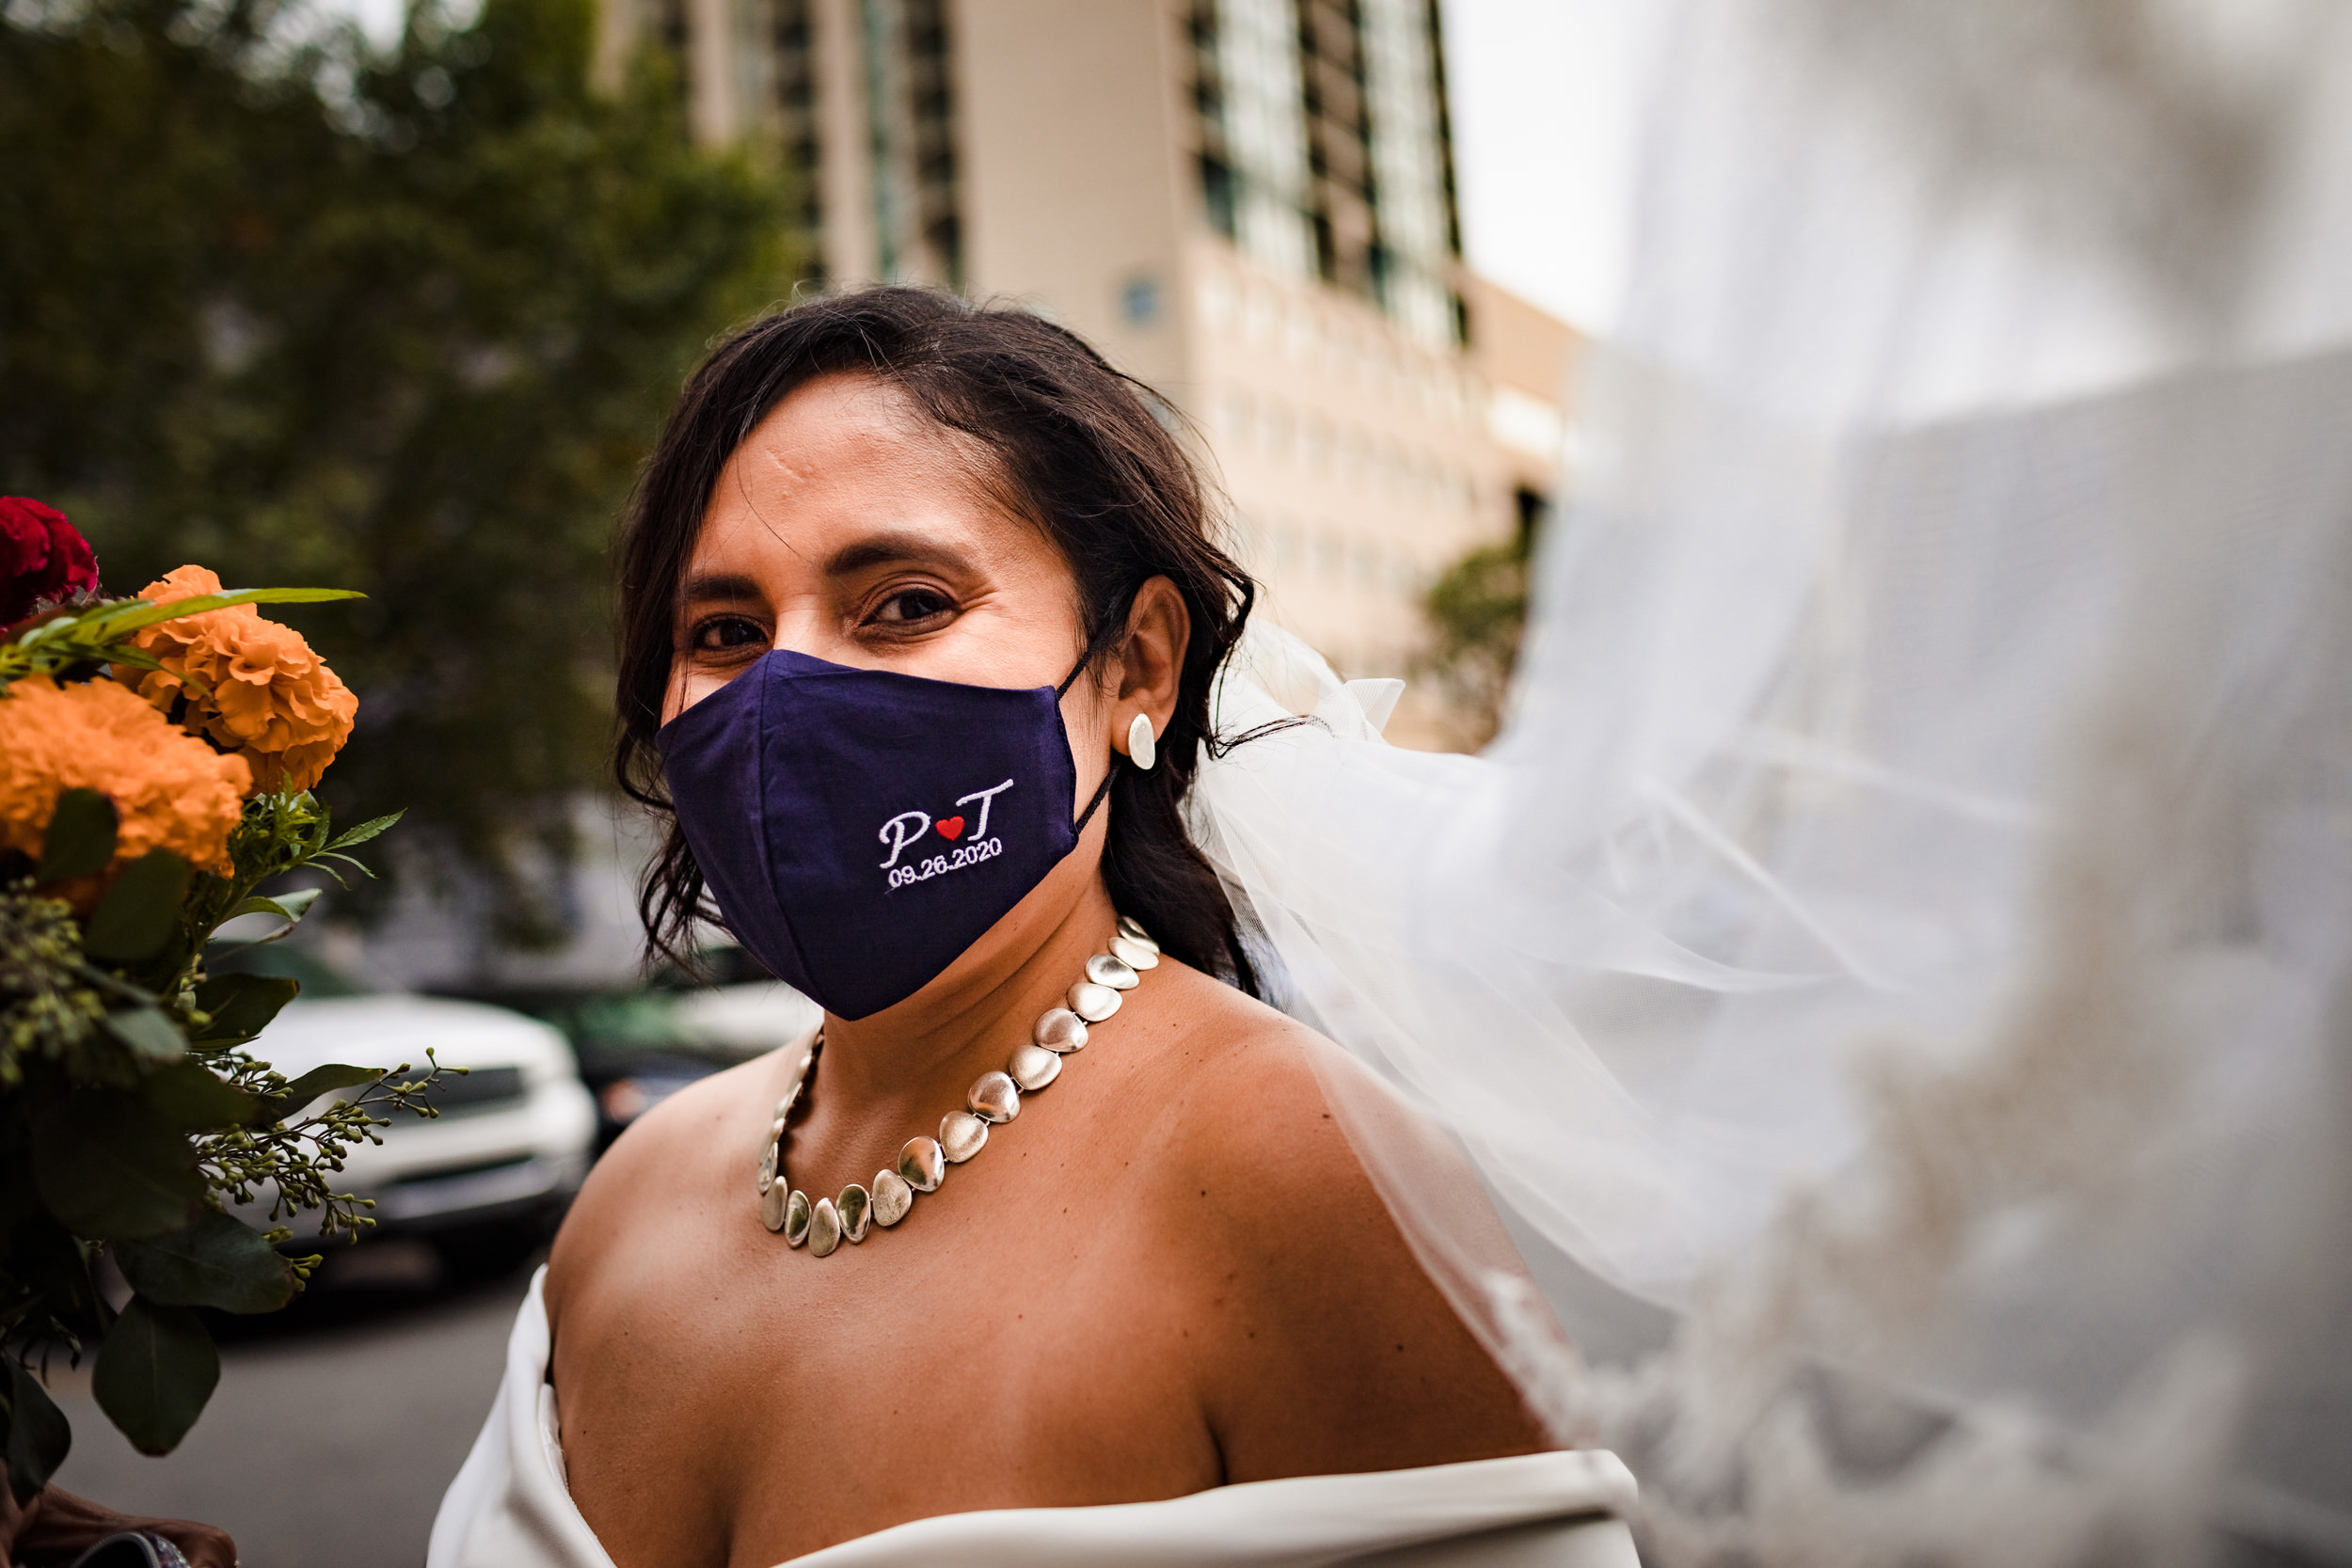 A bride's veil blows in the wind before  her wedding reception at Church of the Ascension Garden wedding.